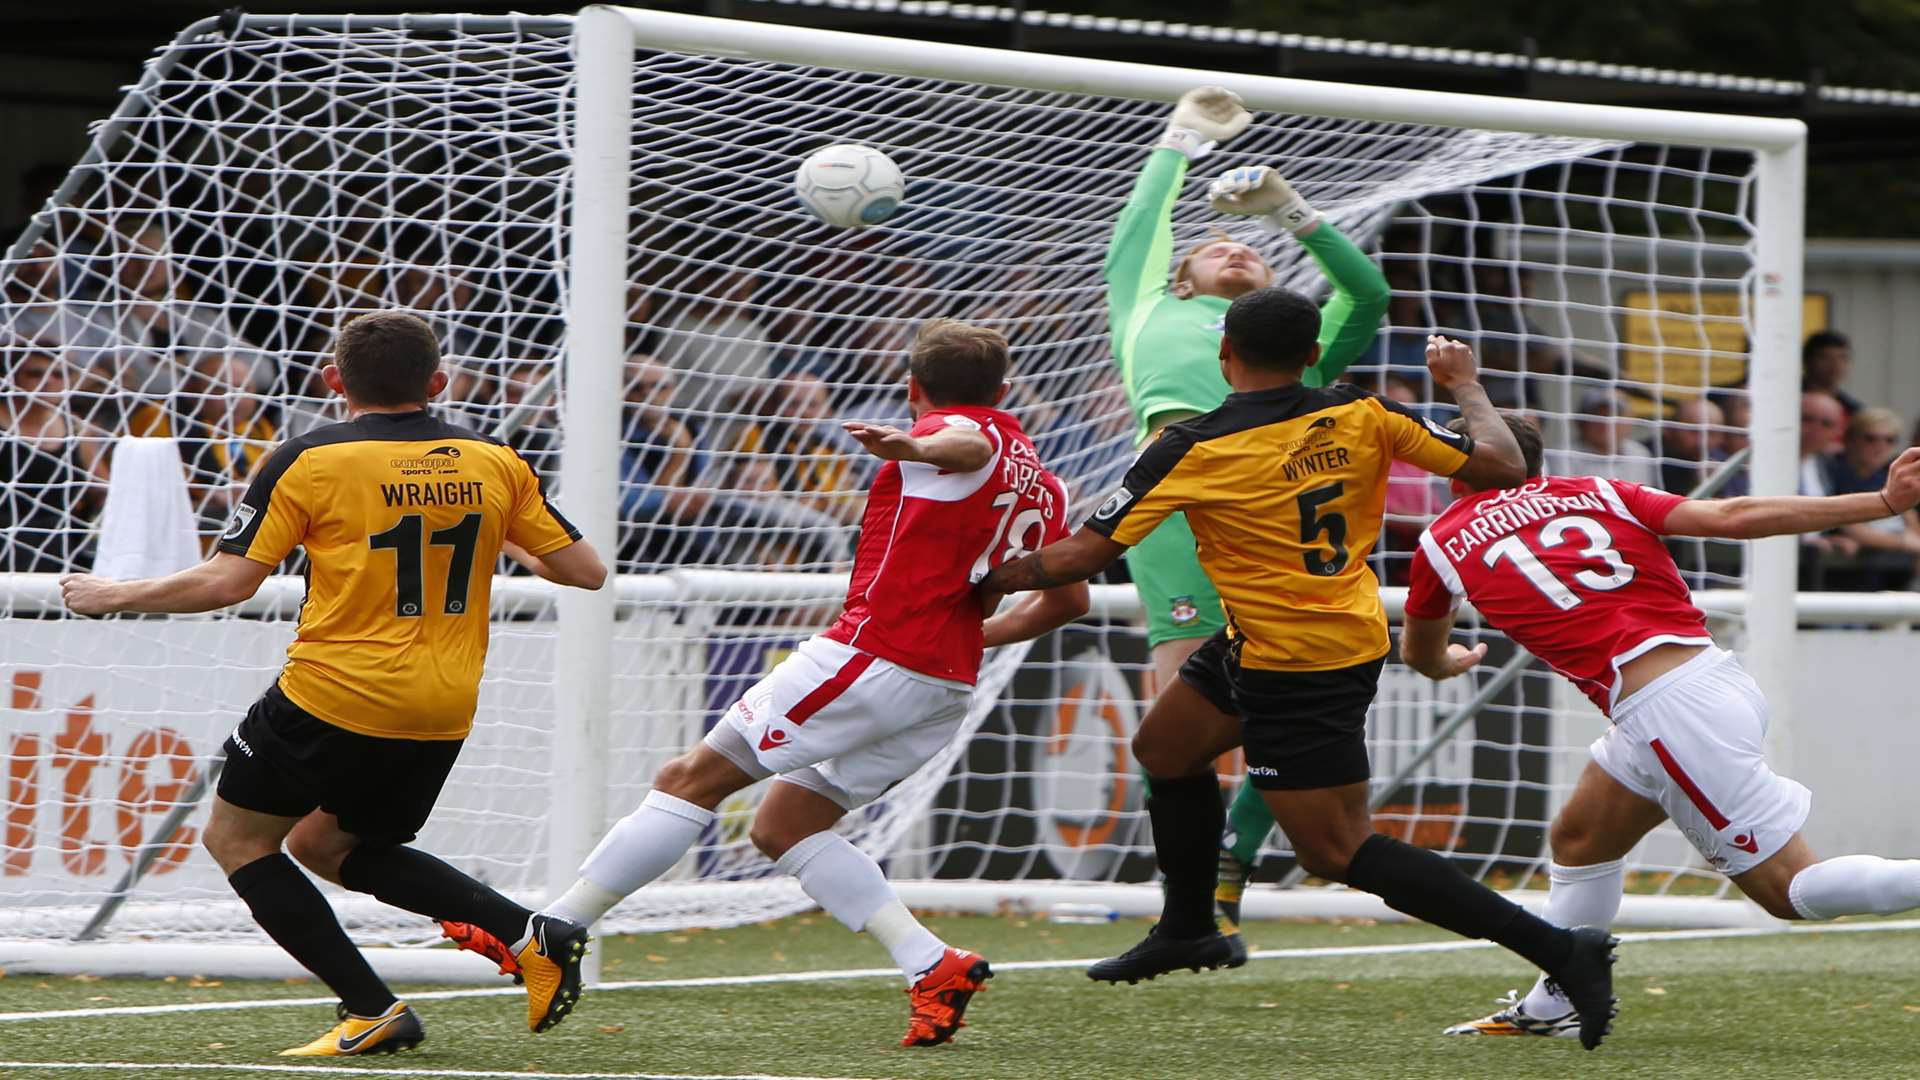 Maidstone's Alex Wynter heads home. Picture: Andy Jones